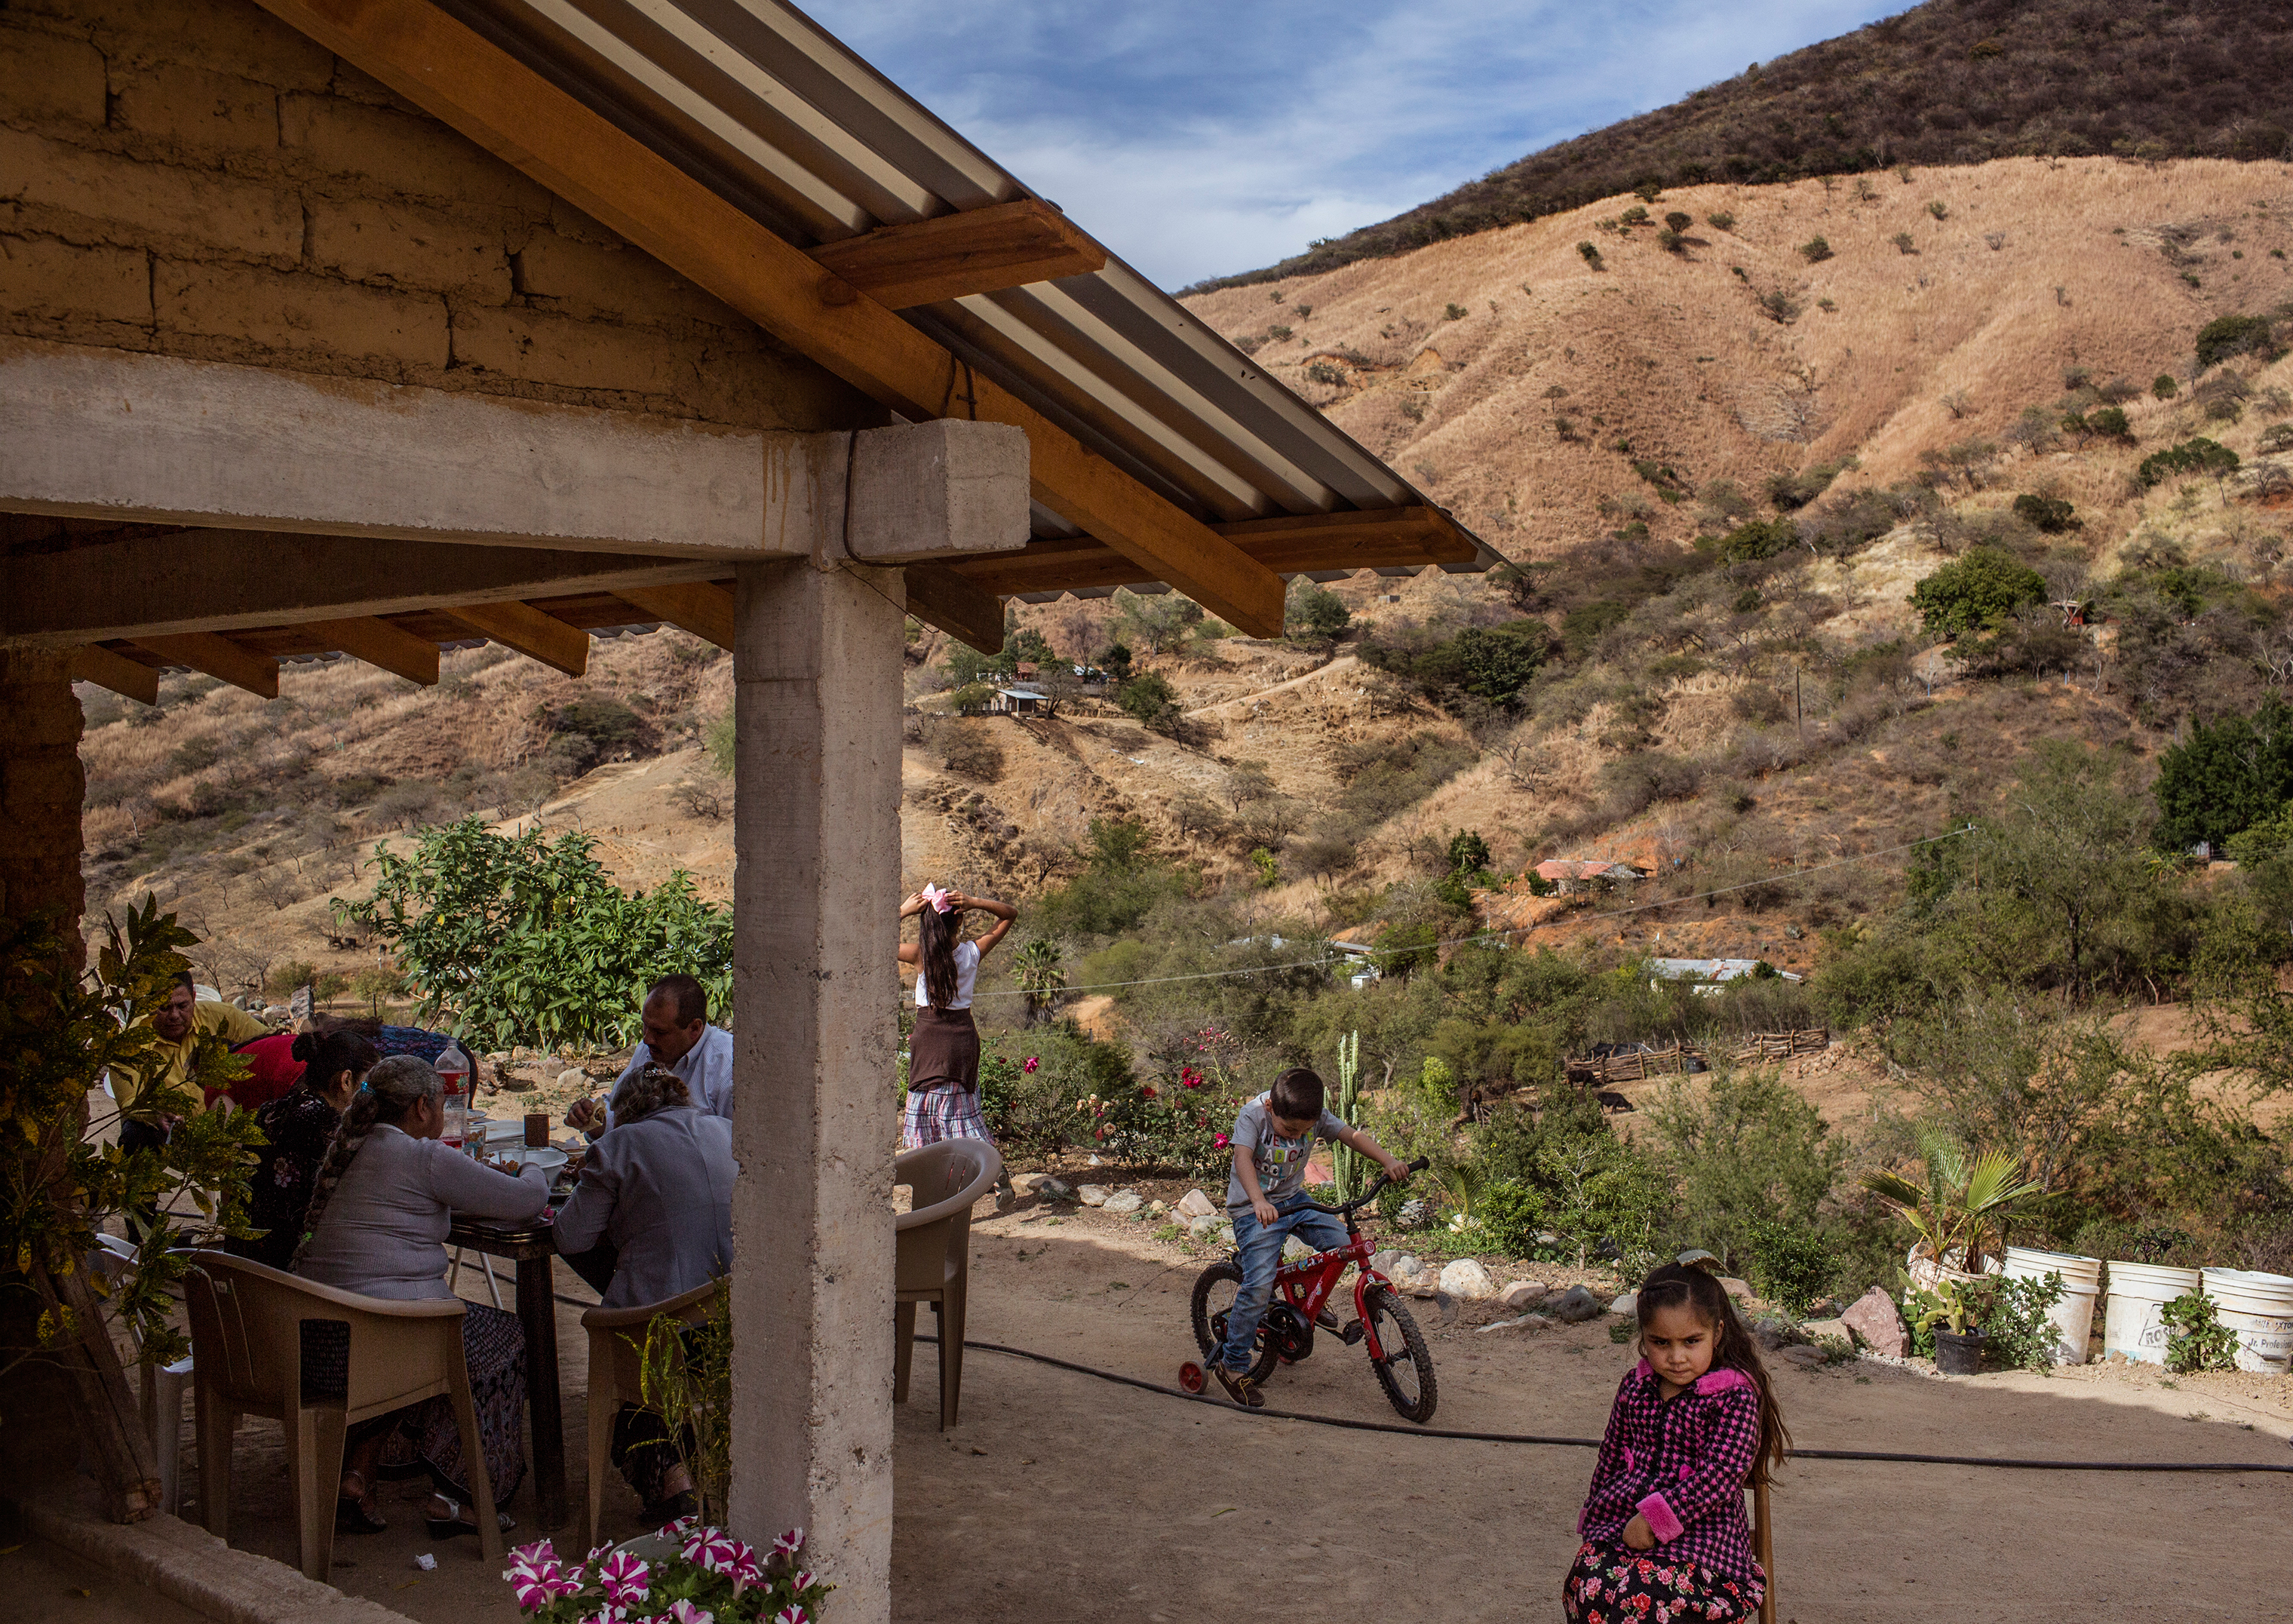 José, who calls Guzmán an uncle, hosts a barbecue with family and friends near Guzmán’s mother’s compound. (Kirsten Luce for TIME)